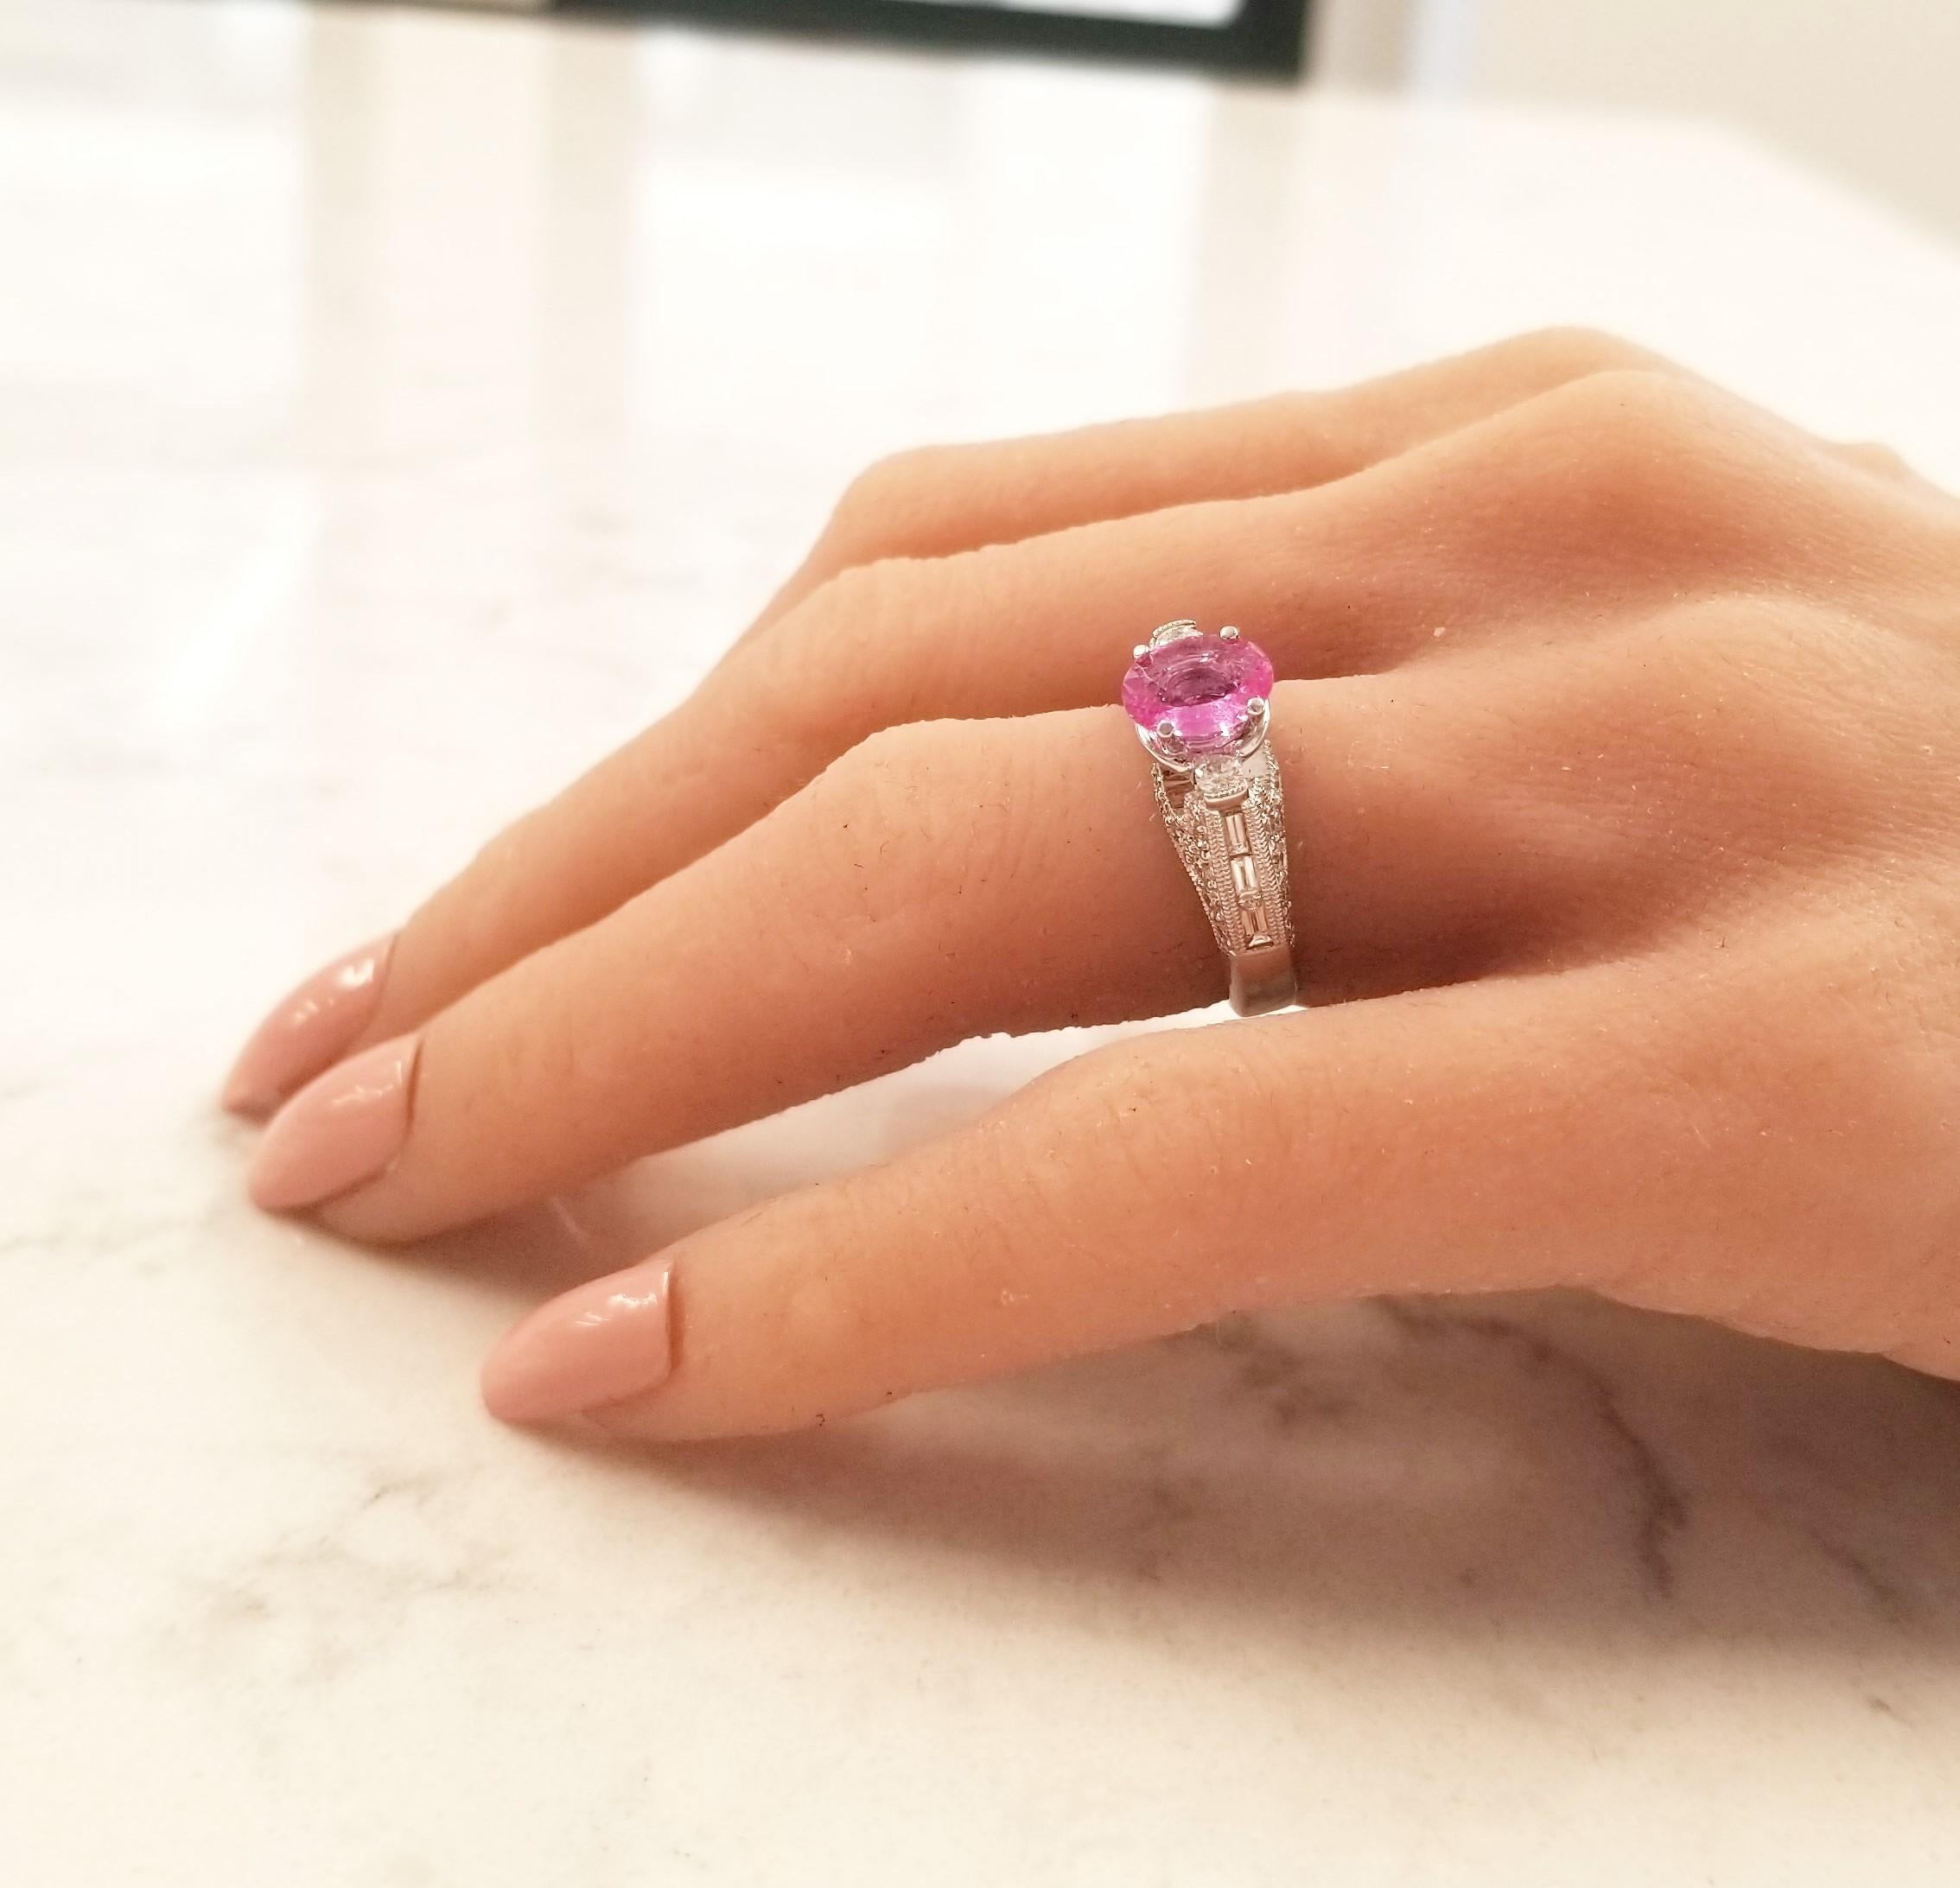 This ring is guaranteed to sparkle, and it captivates from every angle. You’ll never tire of looking at all the stunning details that make this piece a delight to behold. The ring features a 1.42ct oval vivid pink sapphire that sits in the center of